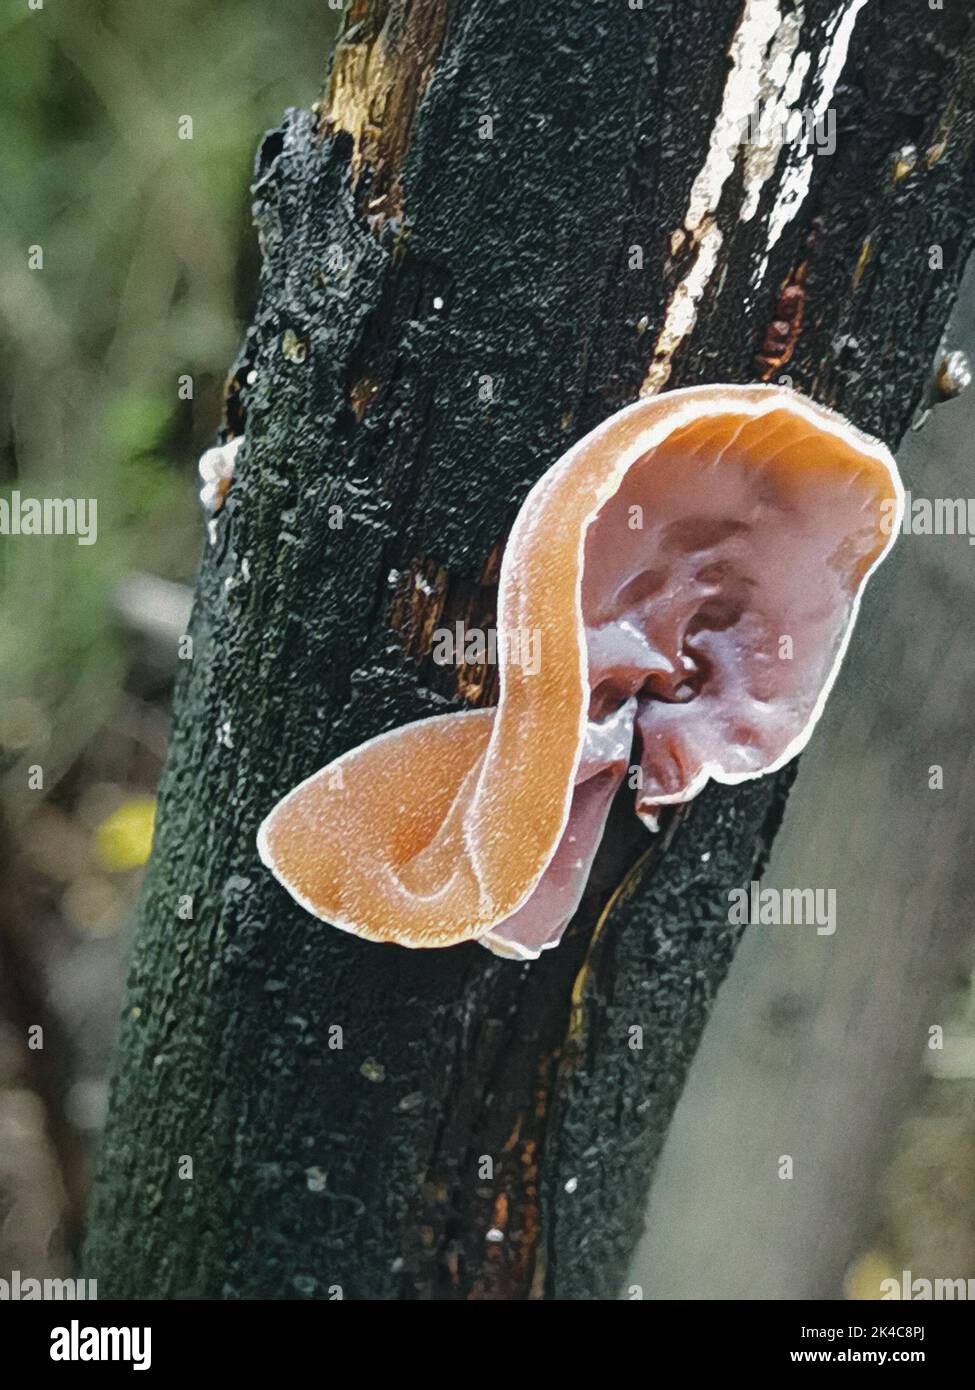 A Wood ear fungus on a tiny tree, vertical Stock Photo